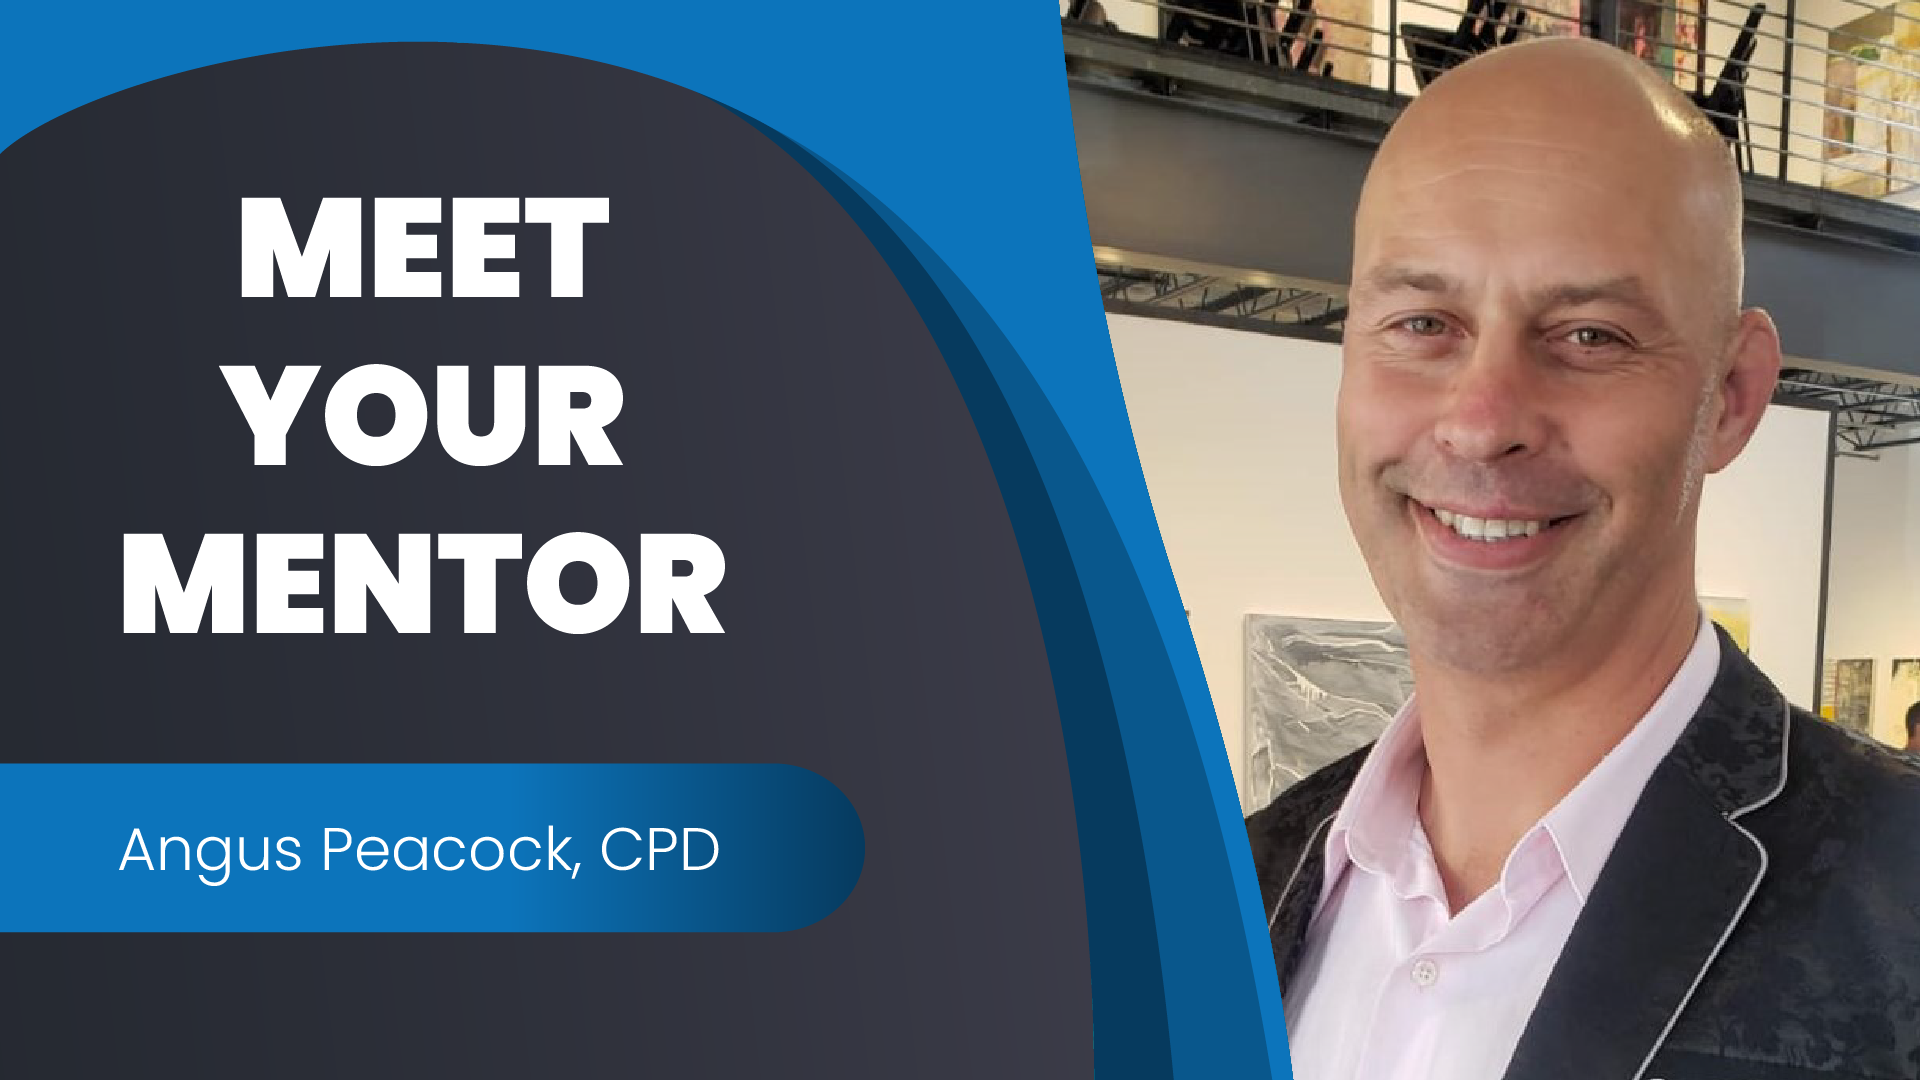 Meet Your Mentor – Angus Peacock, CPD